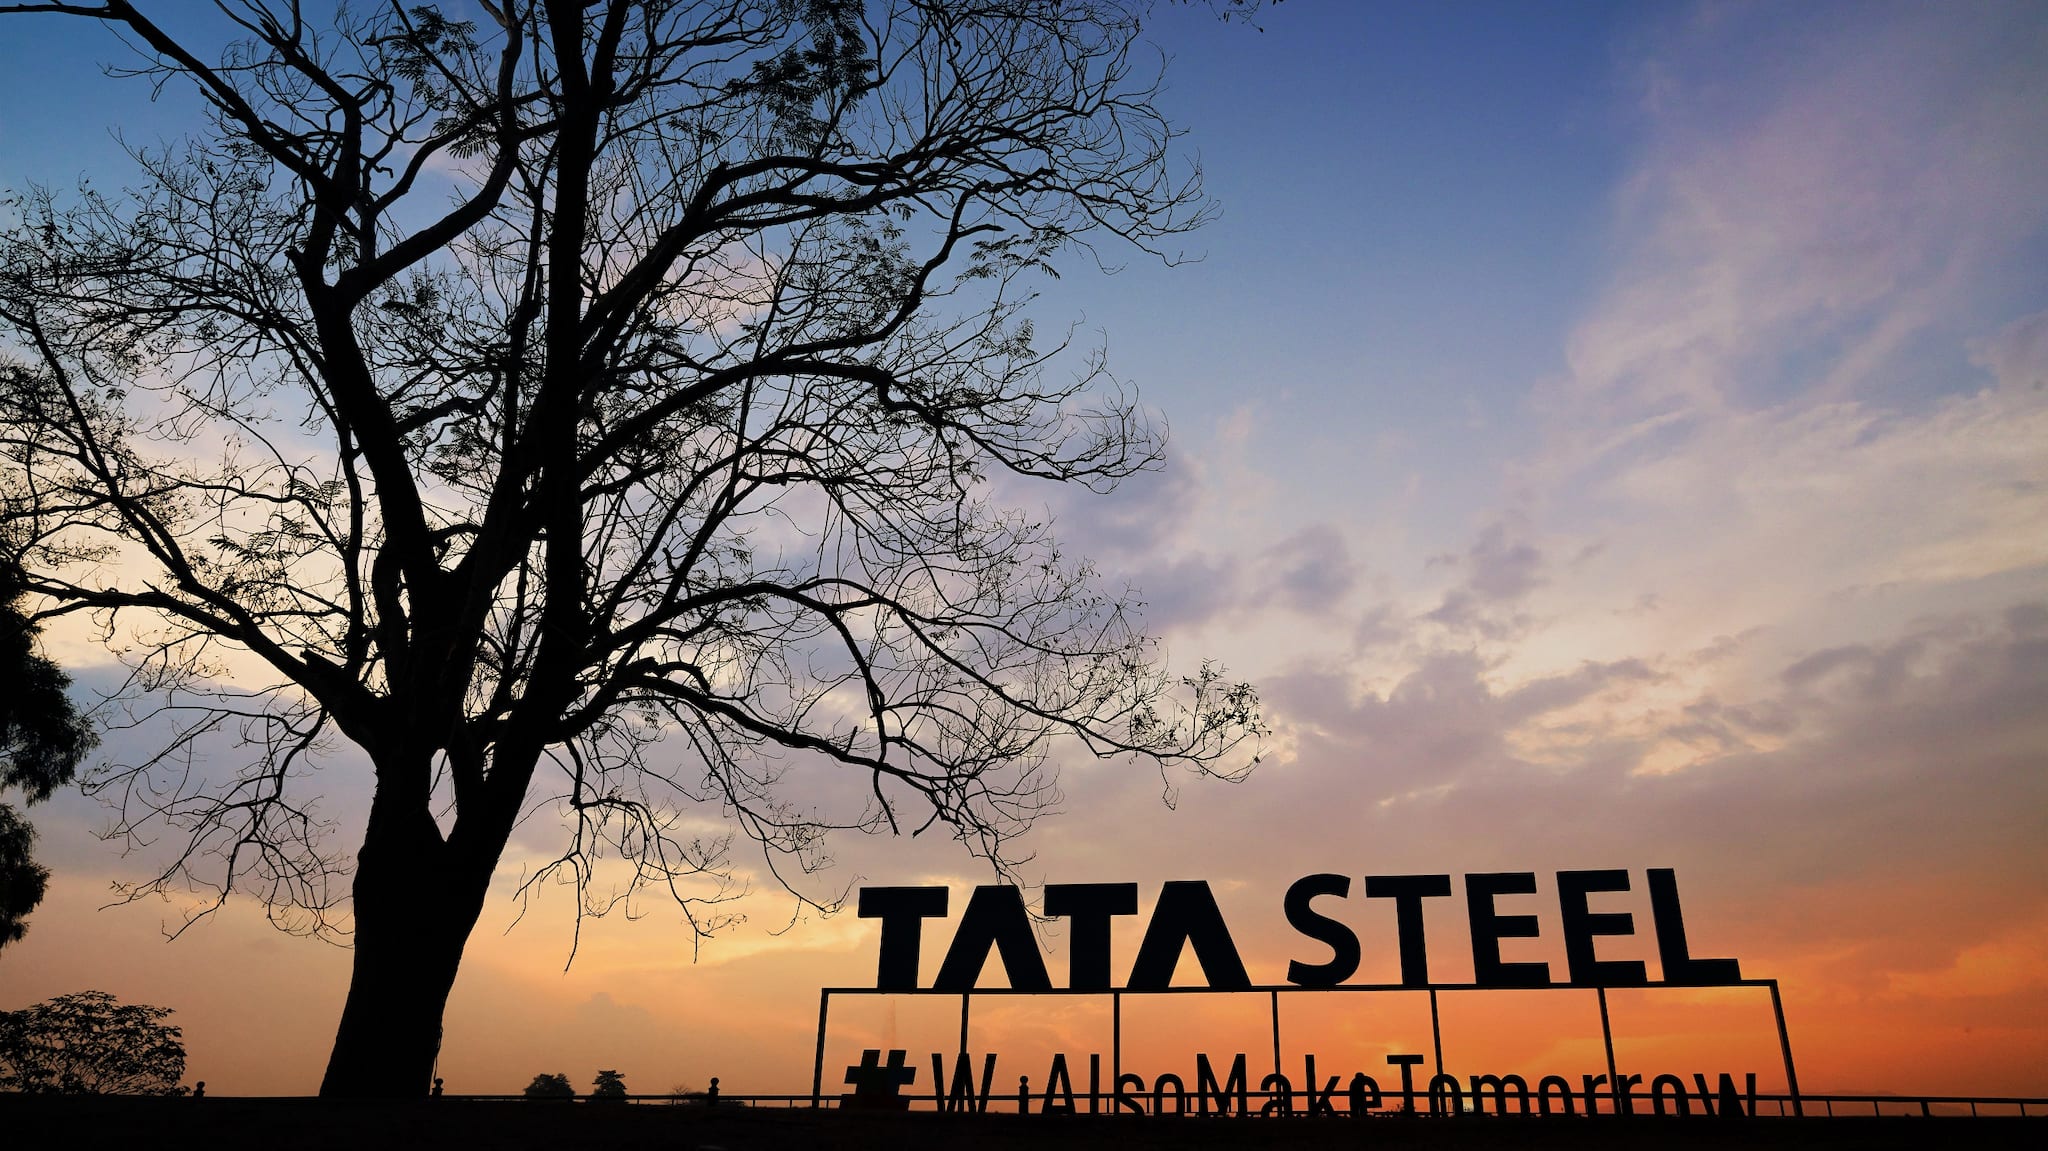 What prompted Tata Steel to rejoin Indian Steel Association a year after its hasty exit?